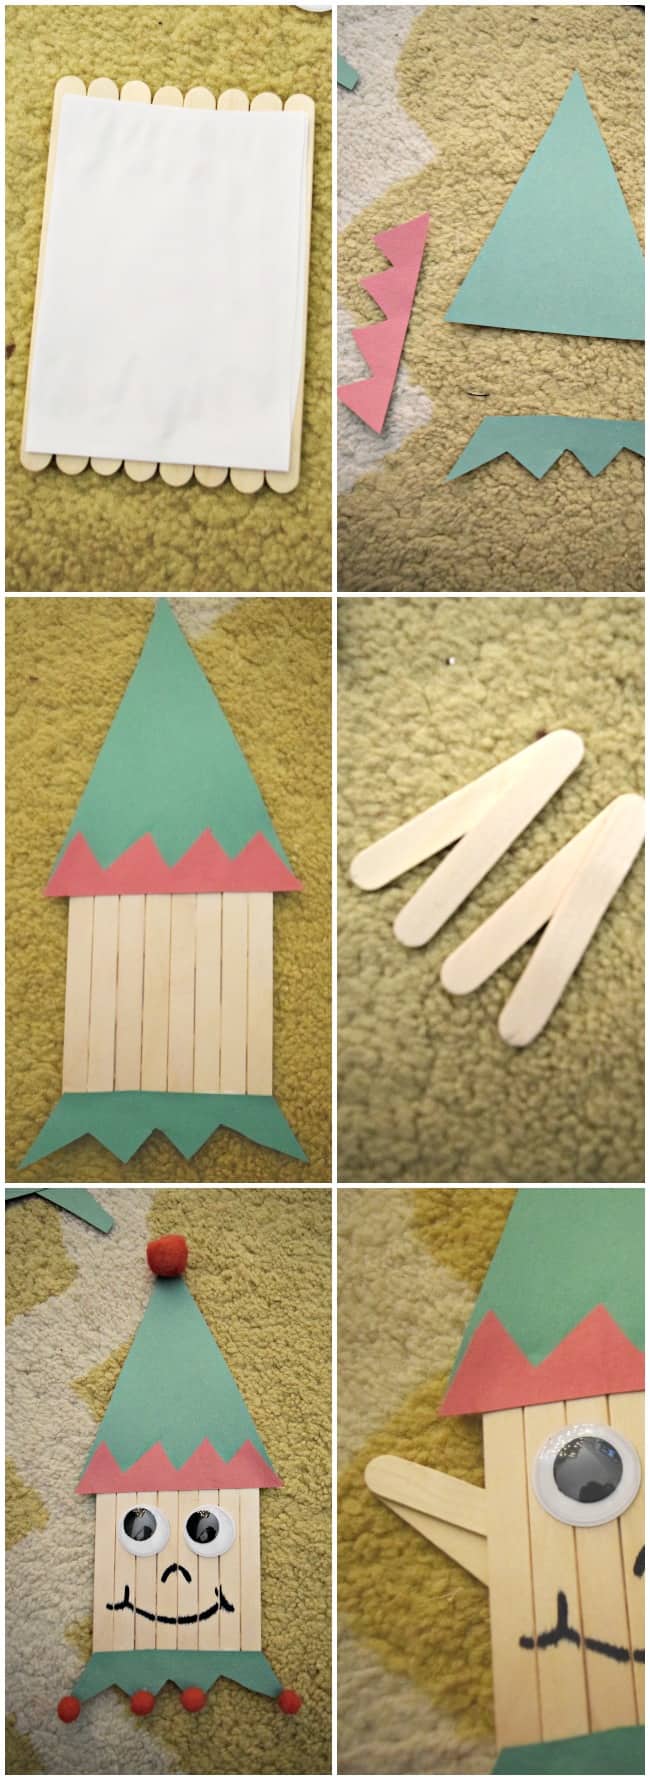 This popsicle stick elf craft is perfect for getting into the spirit of the holiday season. Now that the kids are on Christmas break, pull out the art supplies and get to creating this Santa's little helper. 